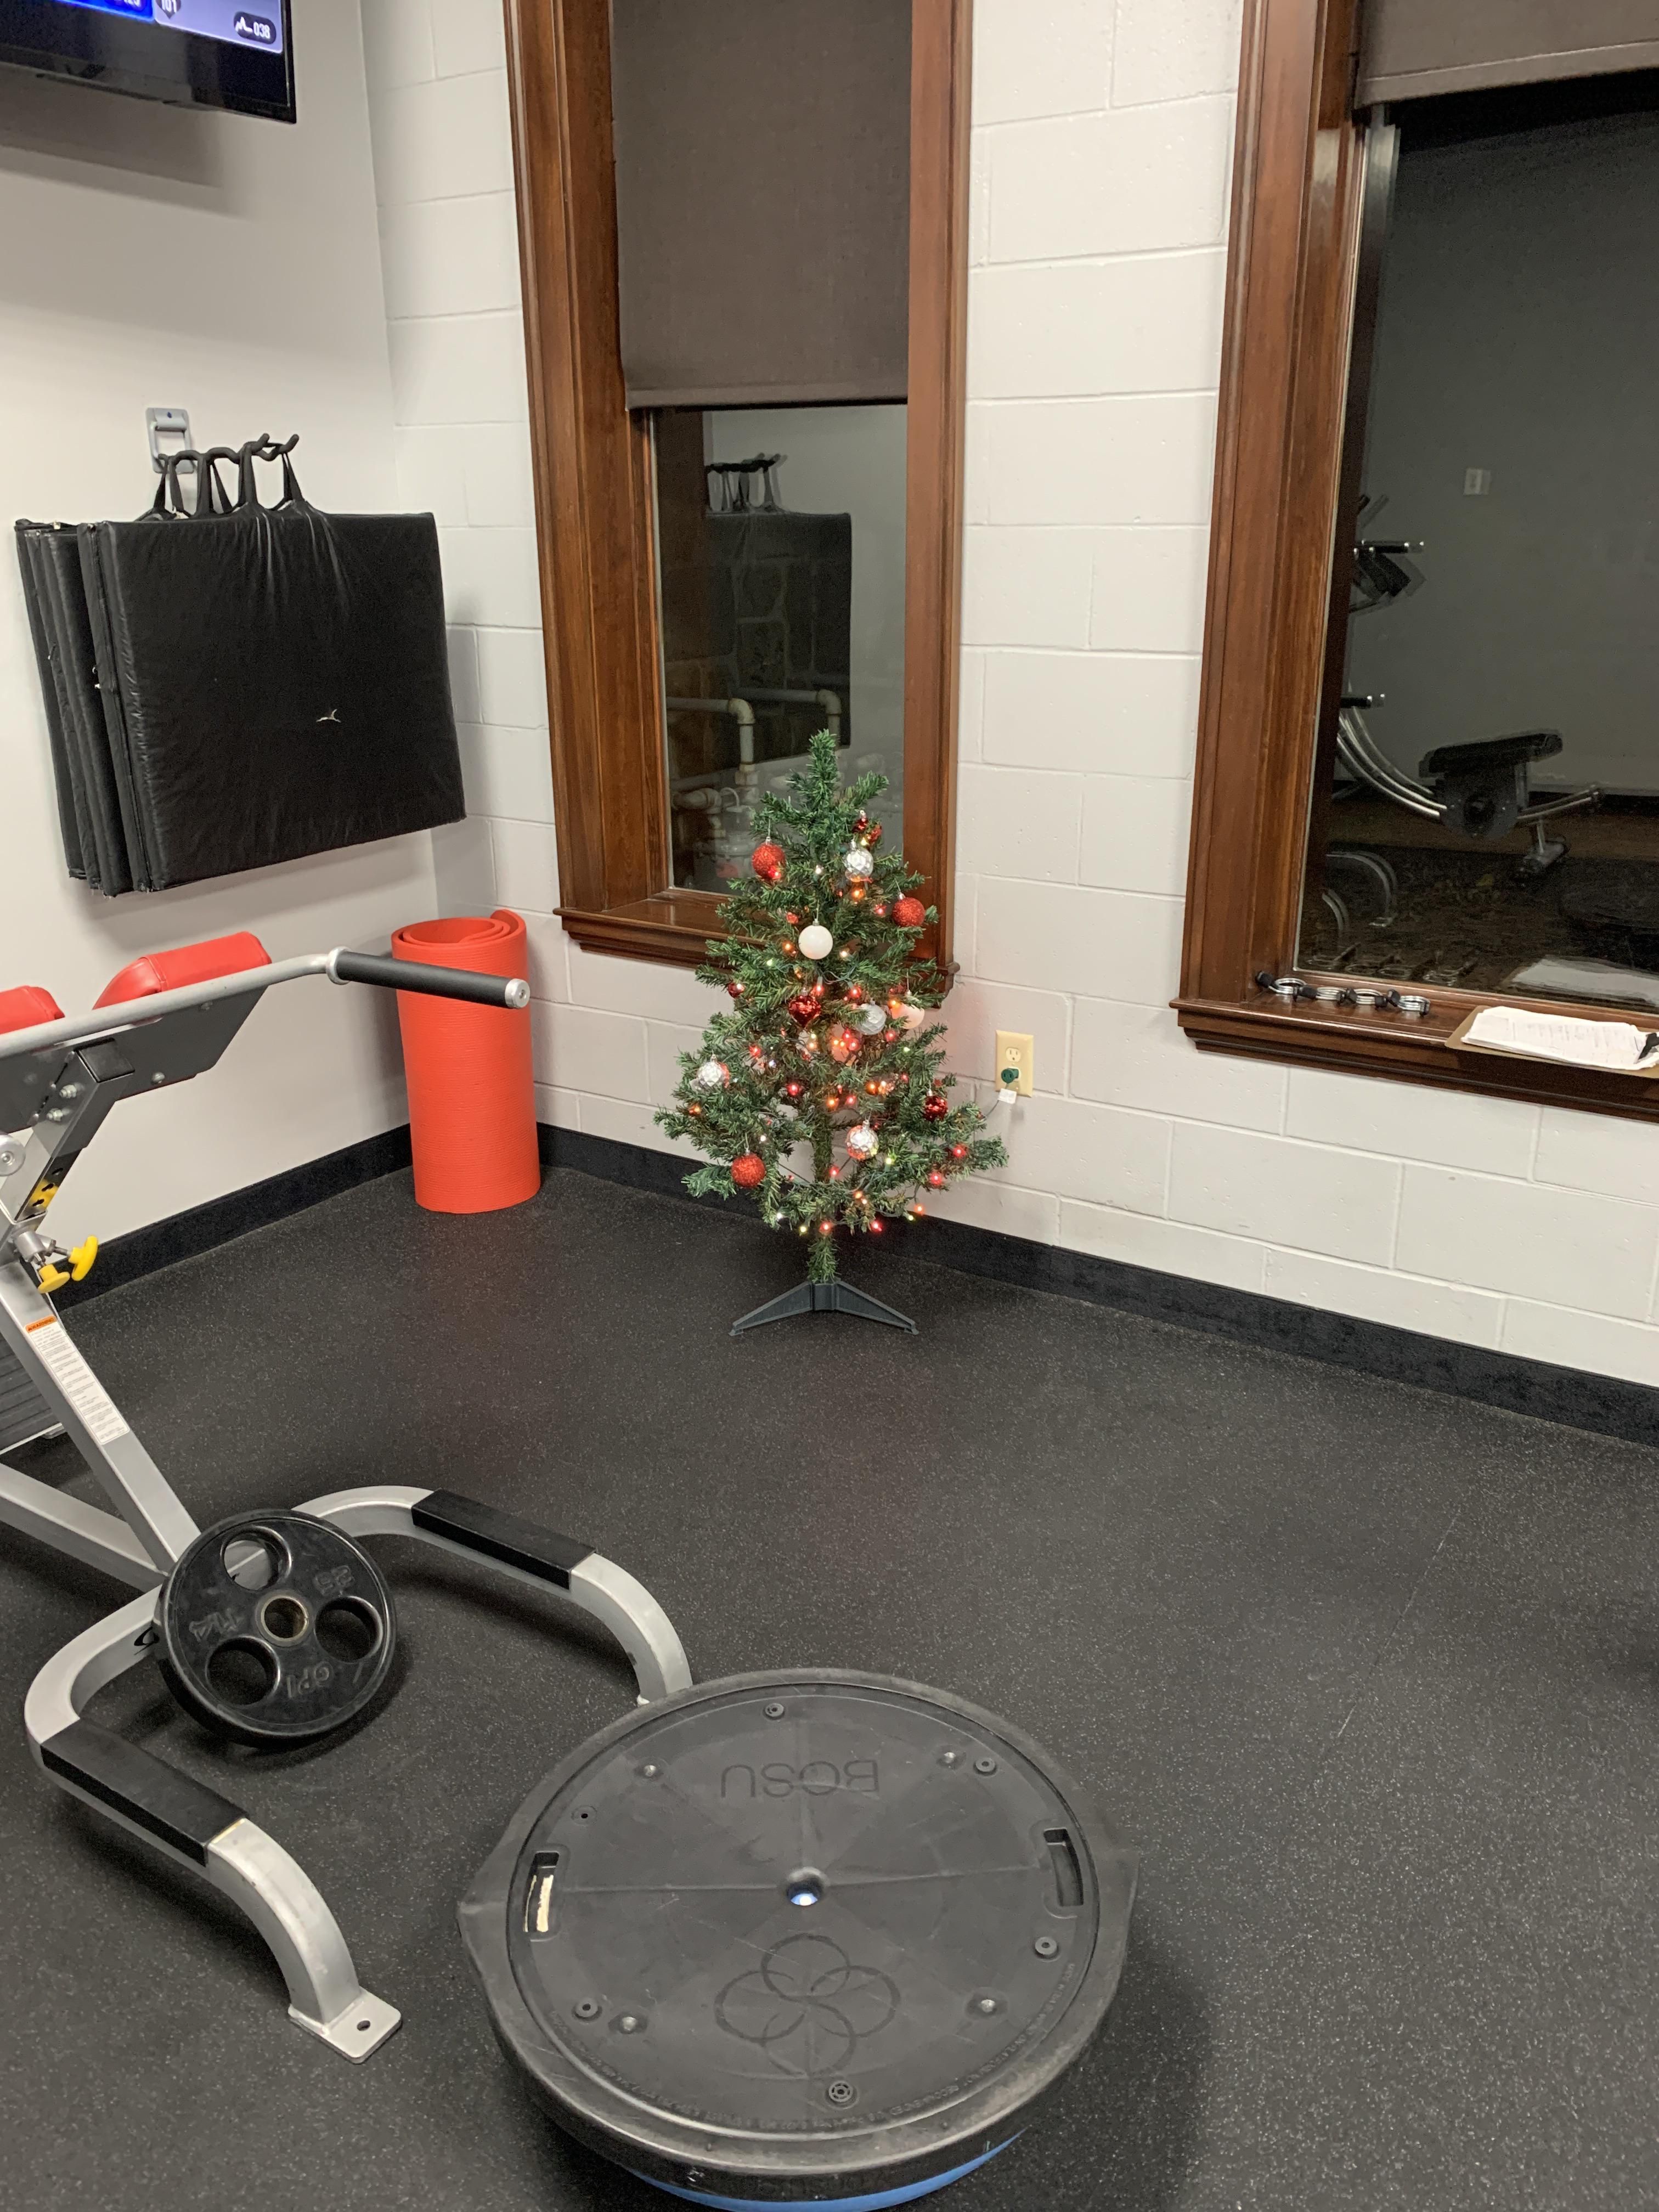 My gym decided to go all out for Christmas this year